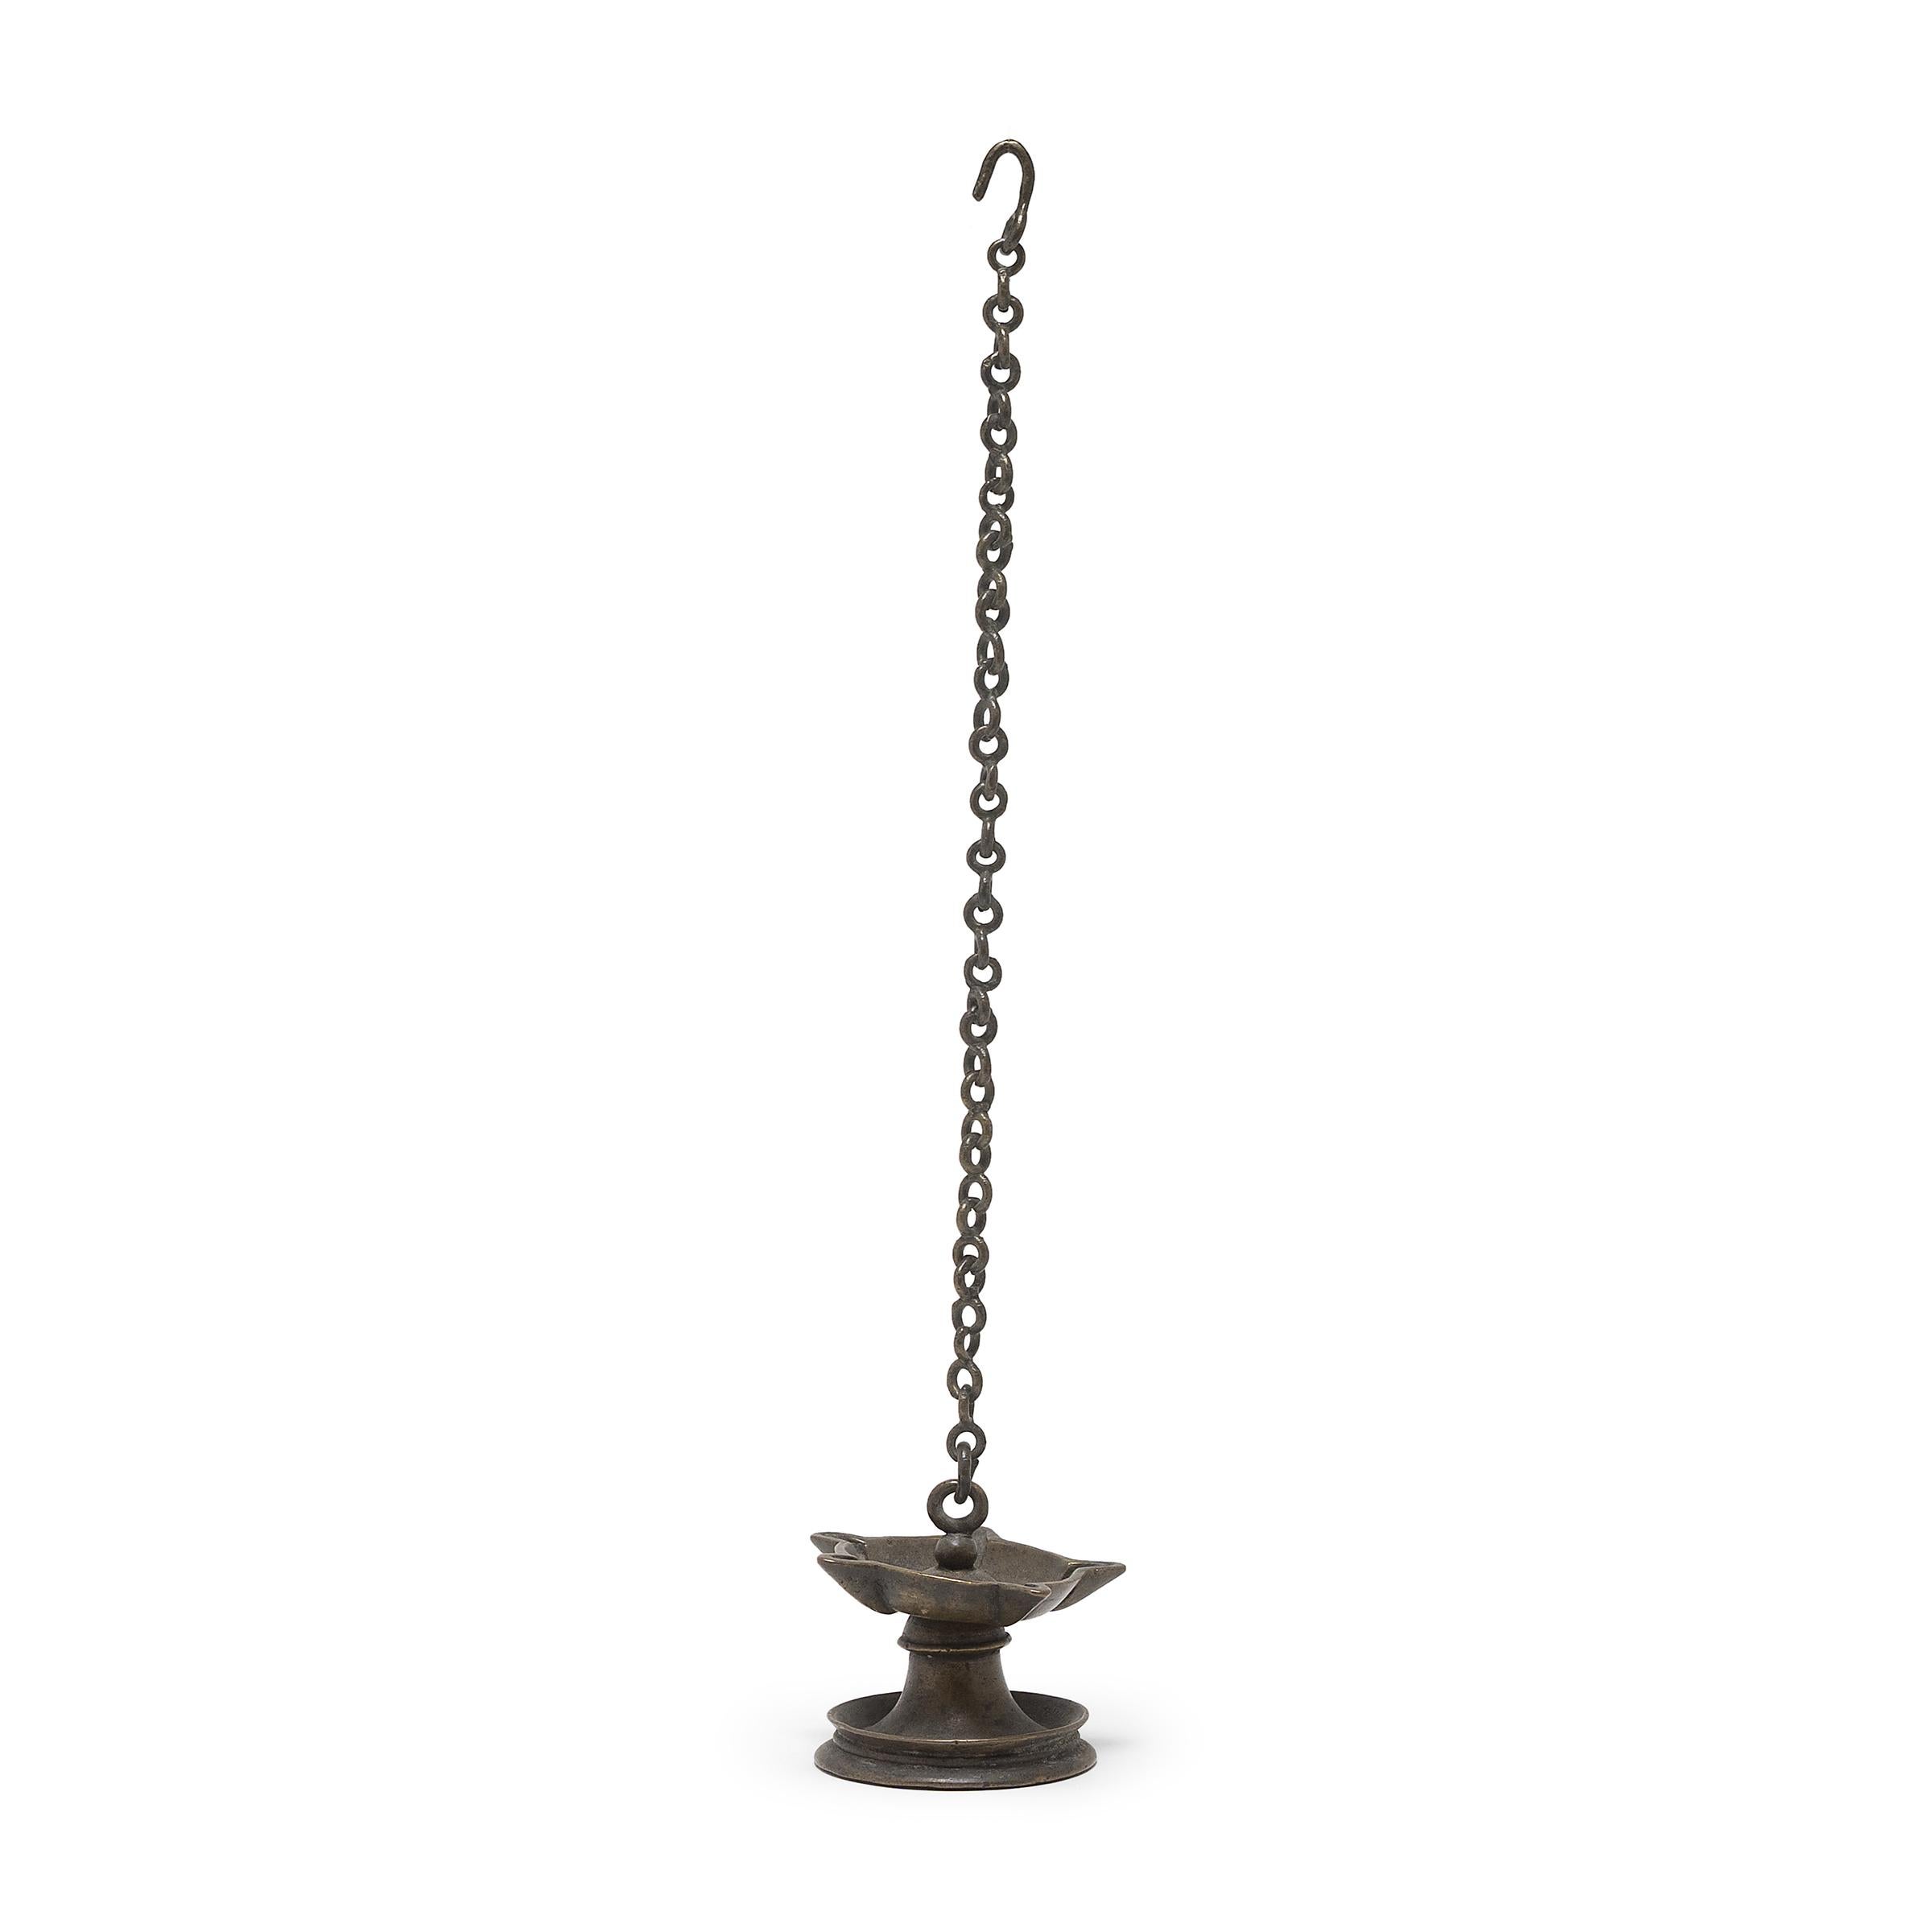 This small bronze object is a form of Indian hanging oil lamp known as a thookku vilakku, or pendant light. This example dates to the 19th century and features a shallow dish raised by a flared base and secured to a long chain and hook. The body of